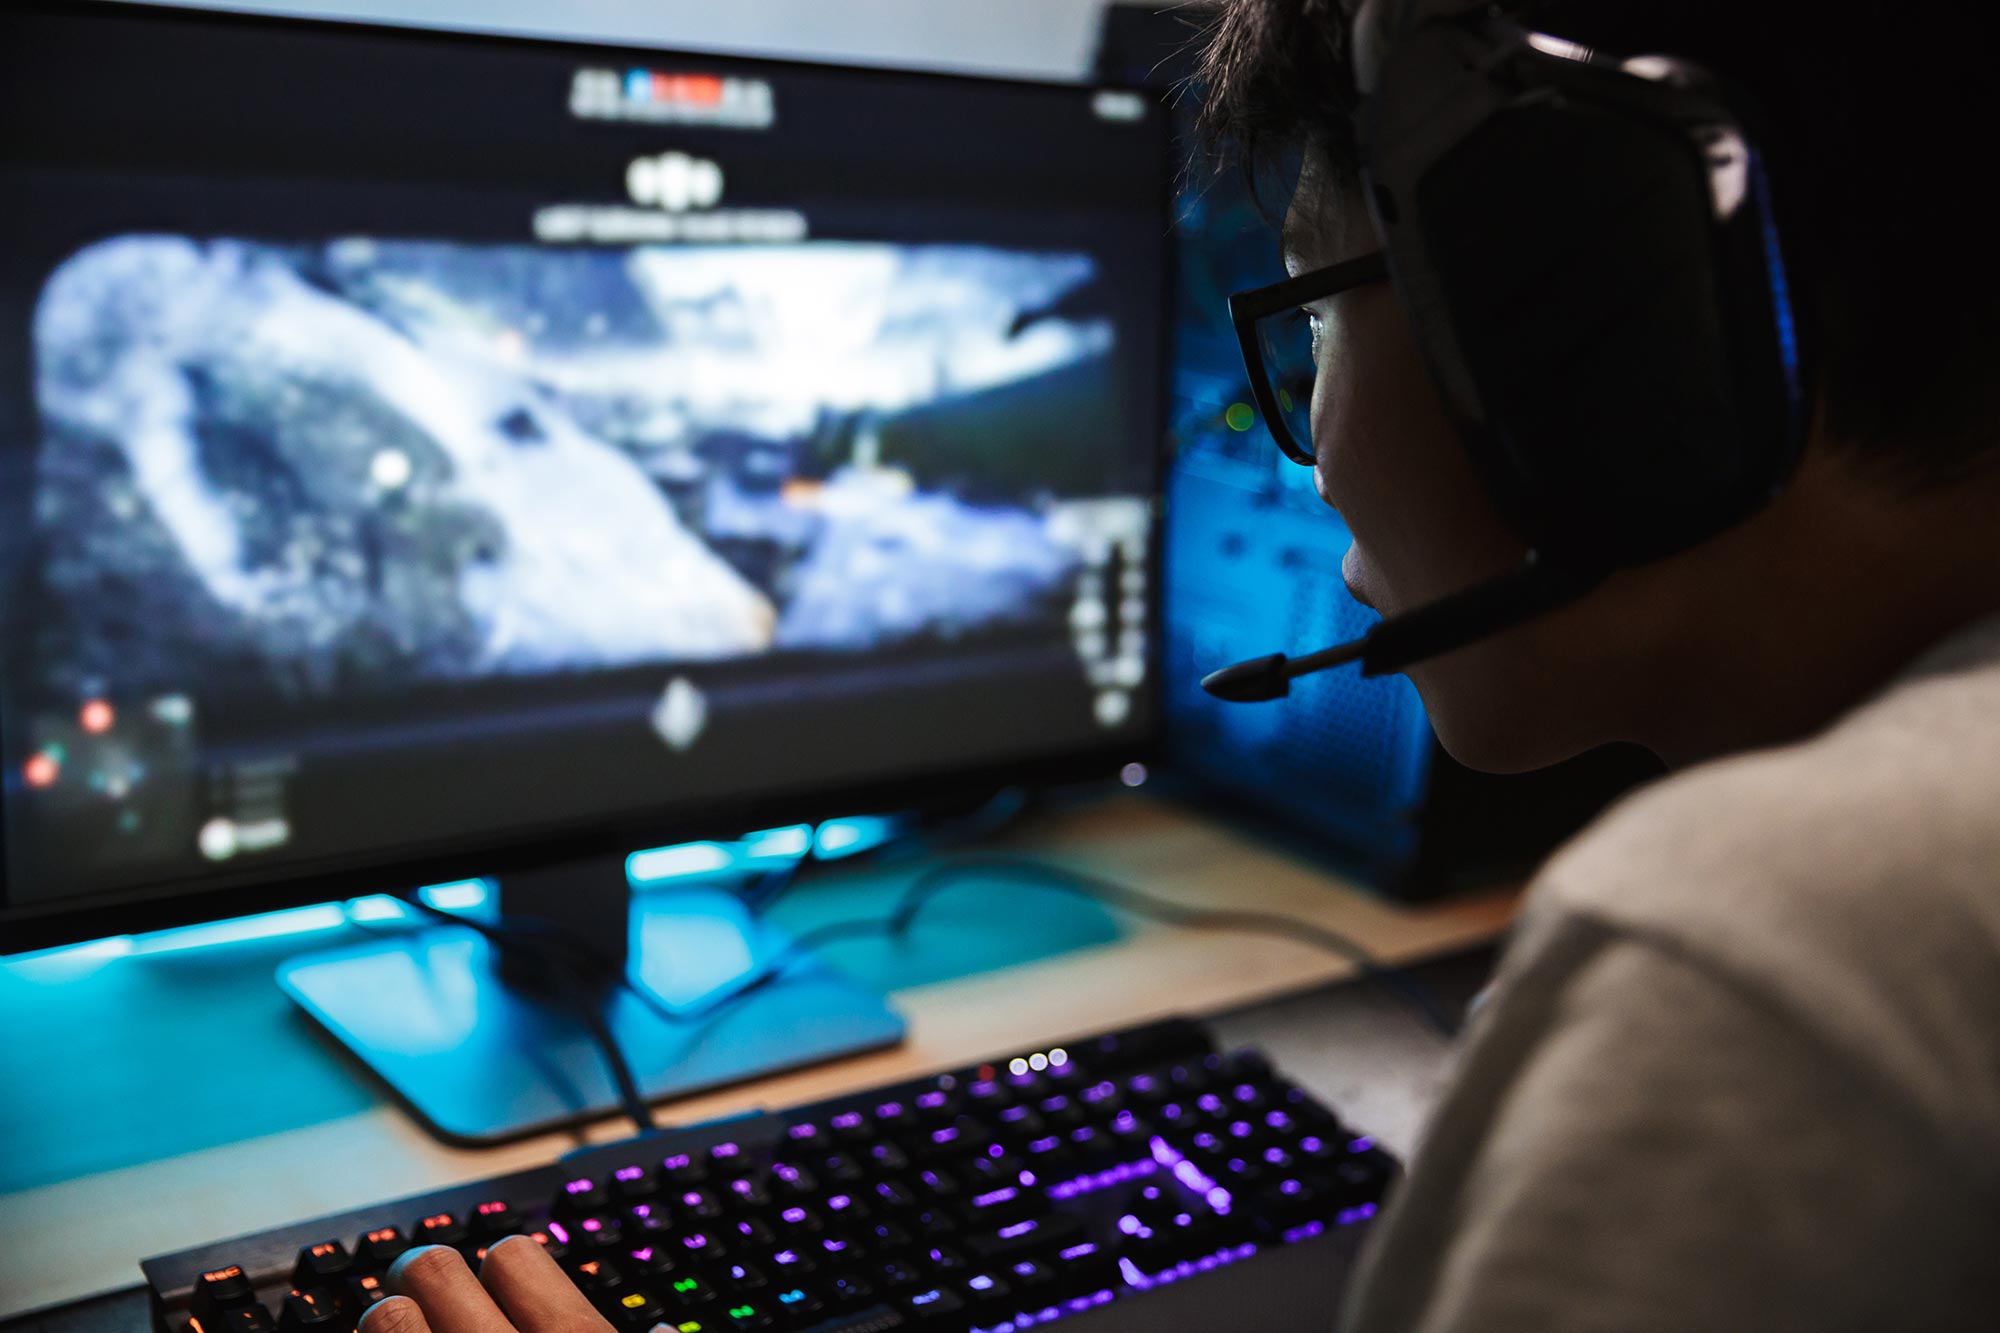 Many parents believe there are benefits to their child's online gaming -  RollerCoaster